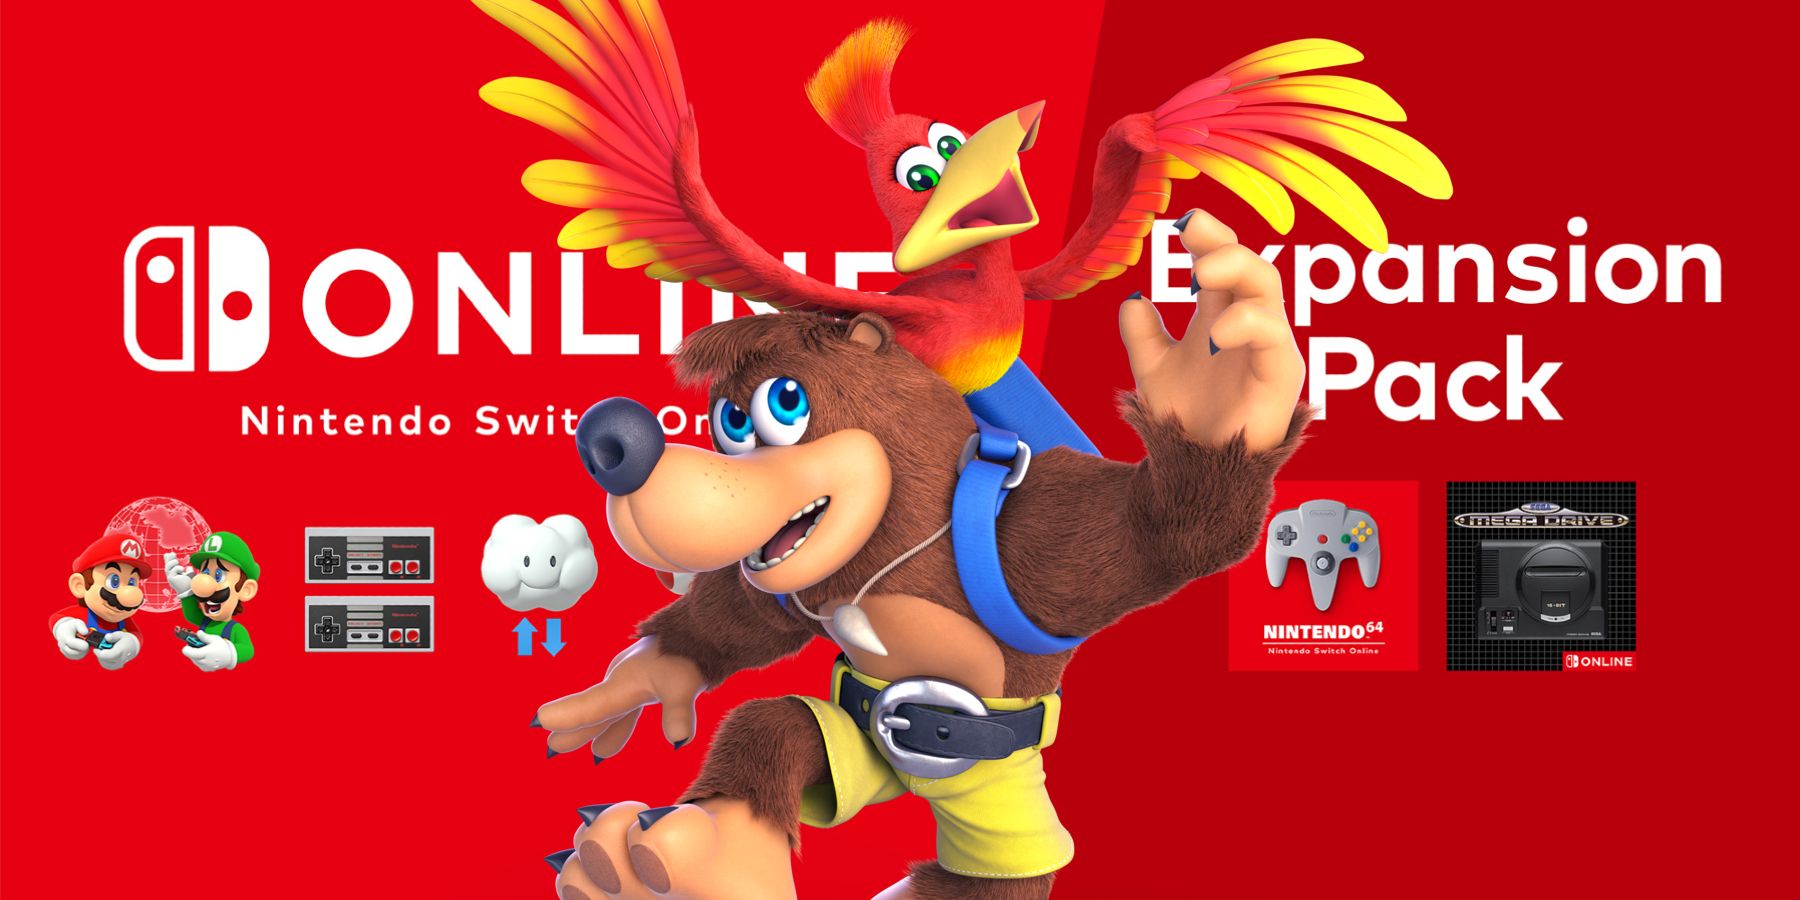 Banjo-Kazooie Is Coming To Switch Online In January - GameSpot